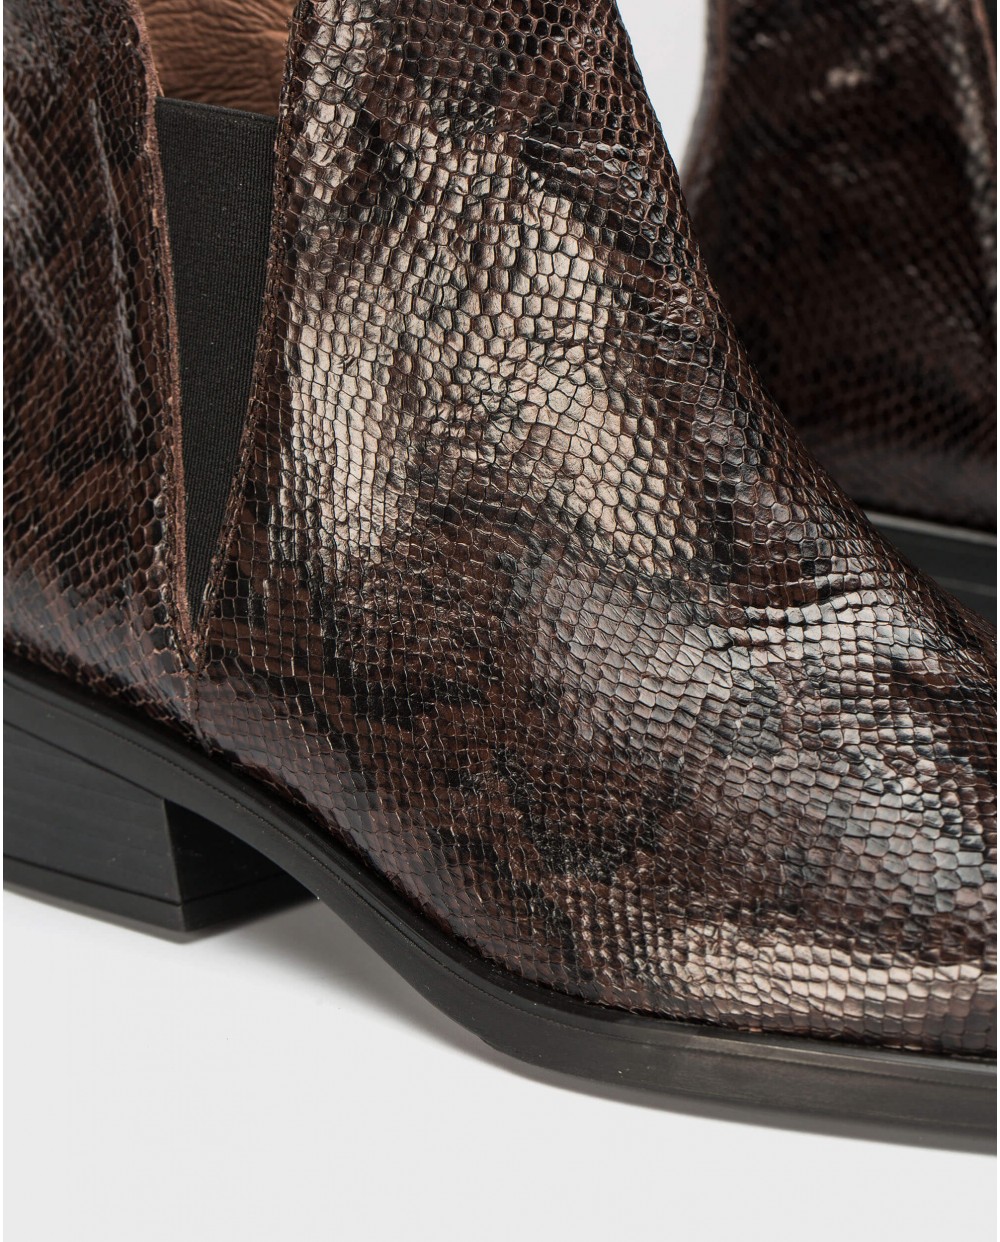 Wonders-Ankle Boots-Animal print ankle boot